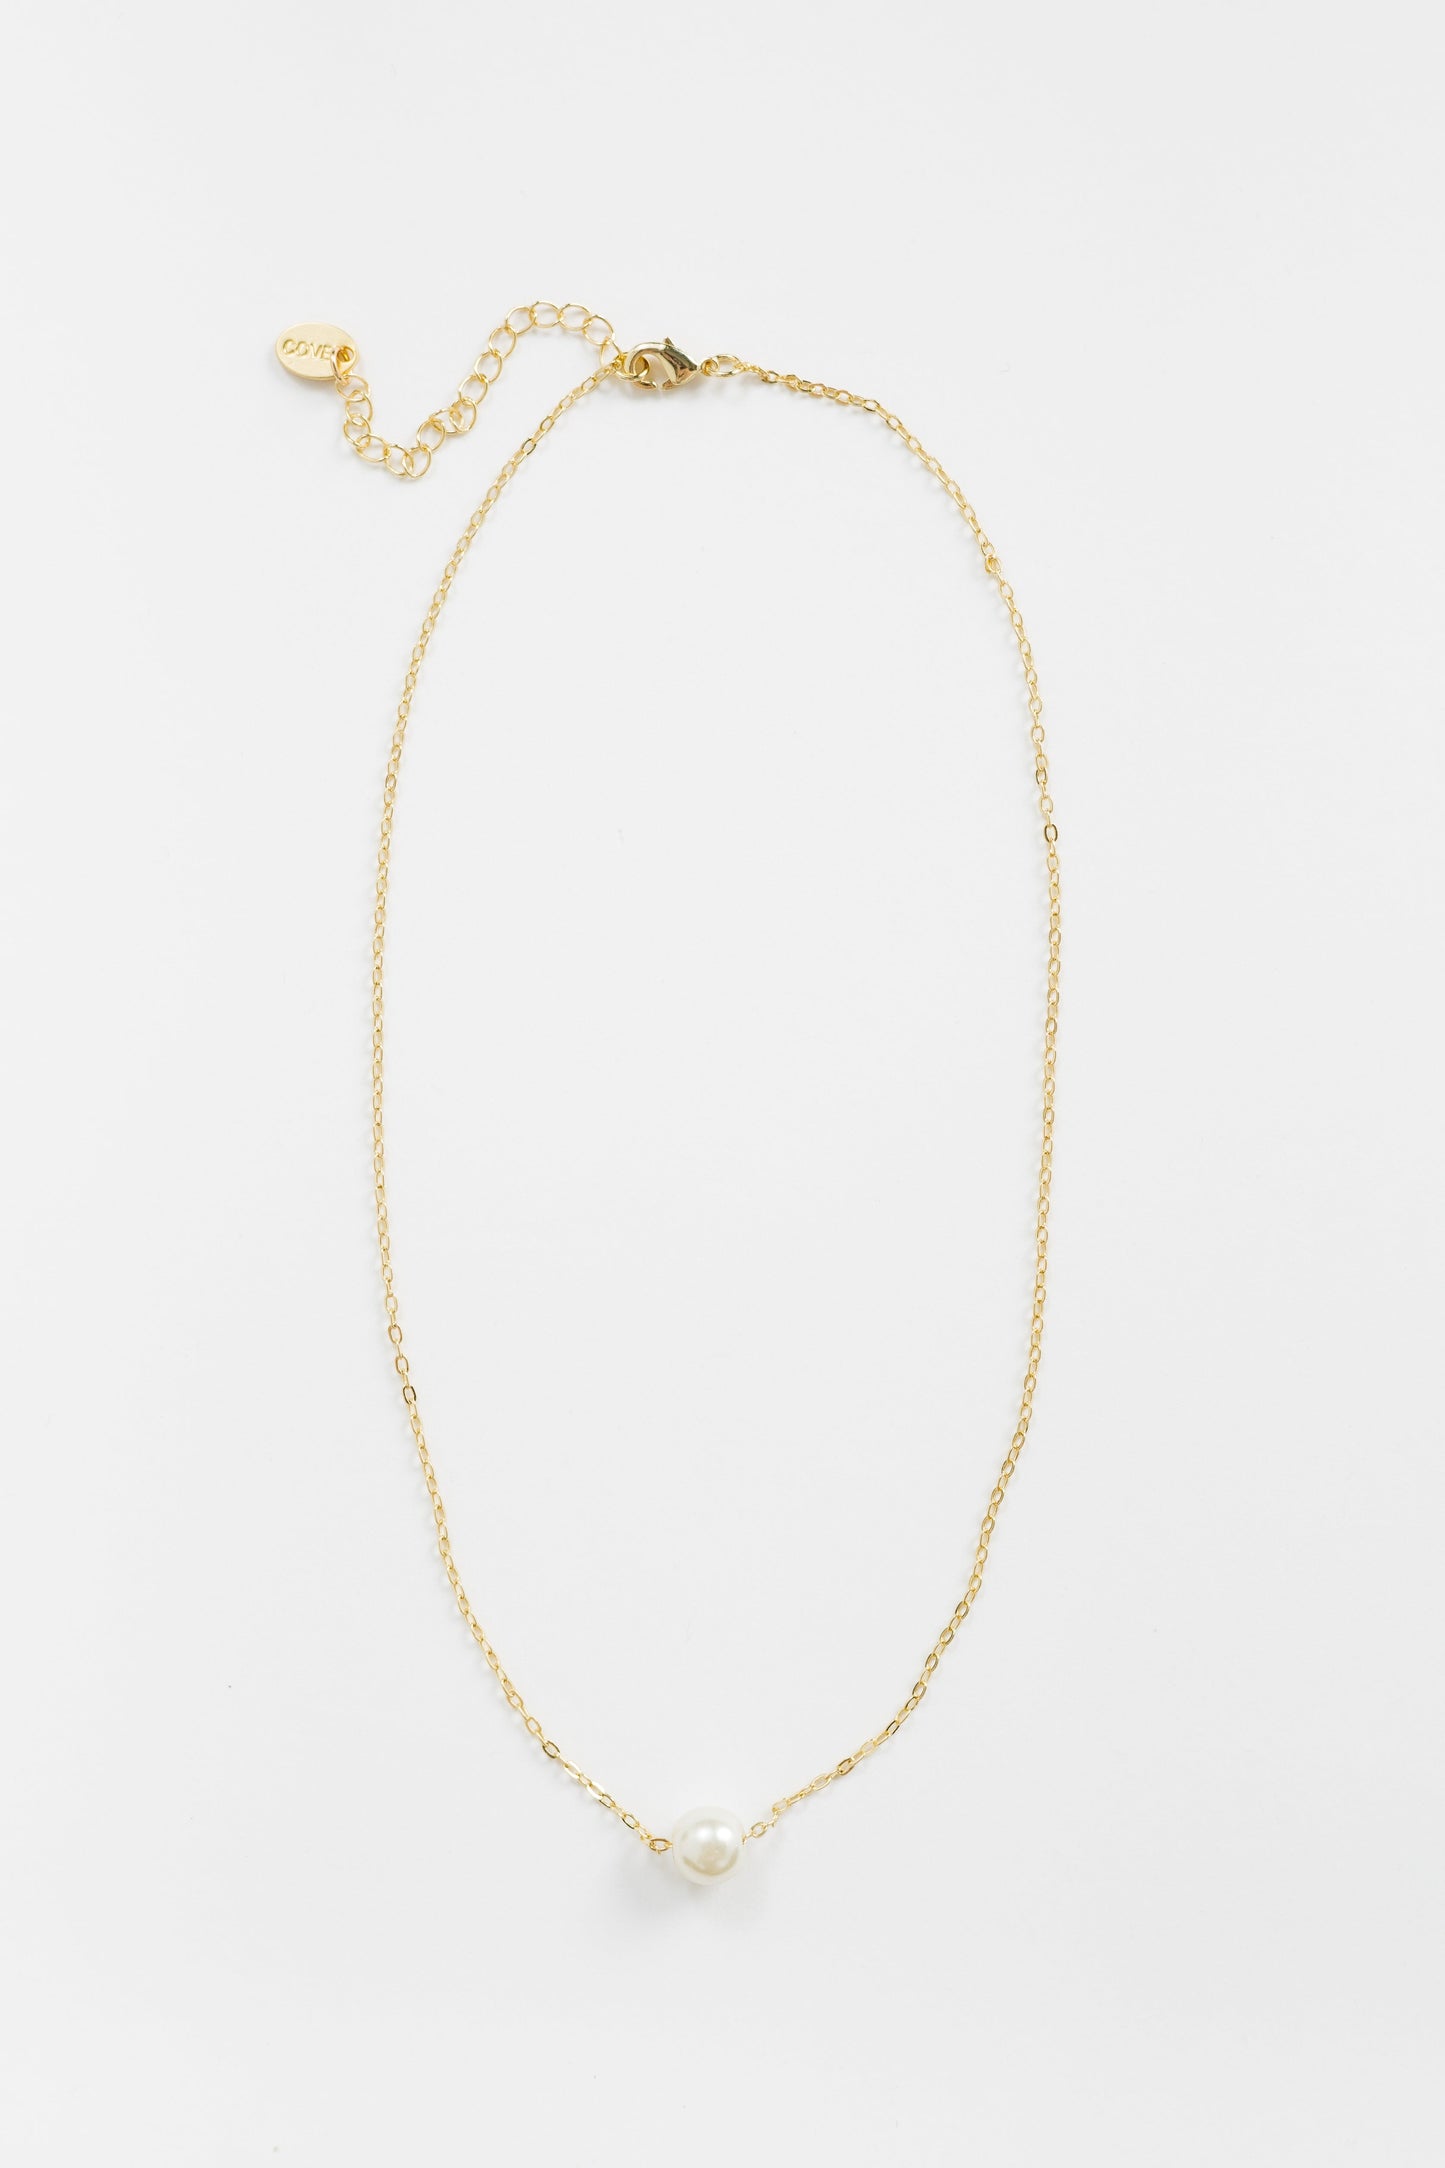 Cove Lotti Necklace WOMEN'S NECKLACE Arbor Gold OS 